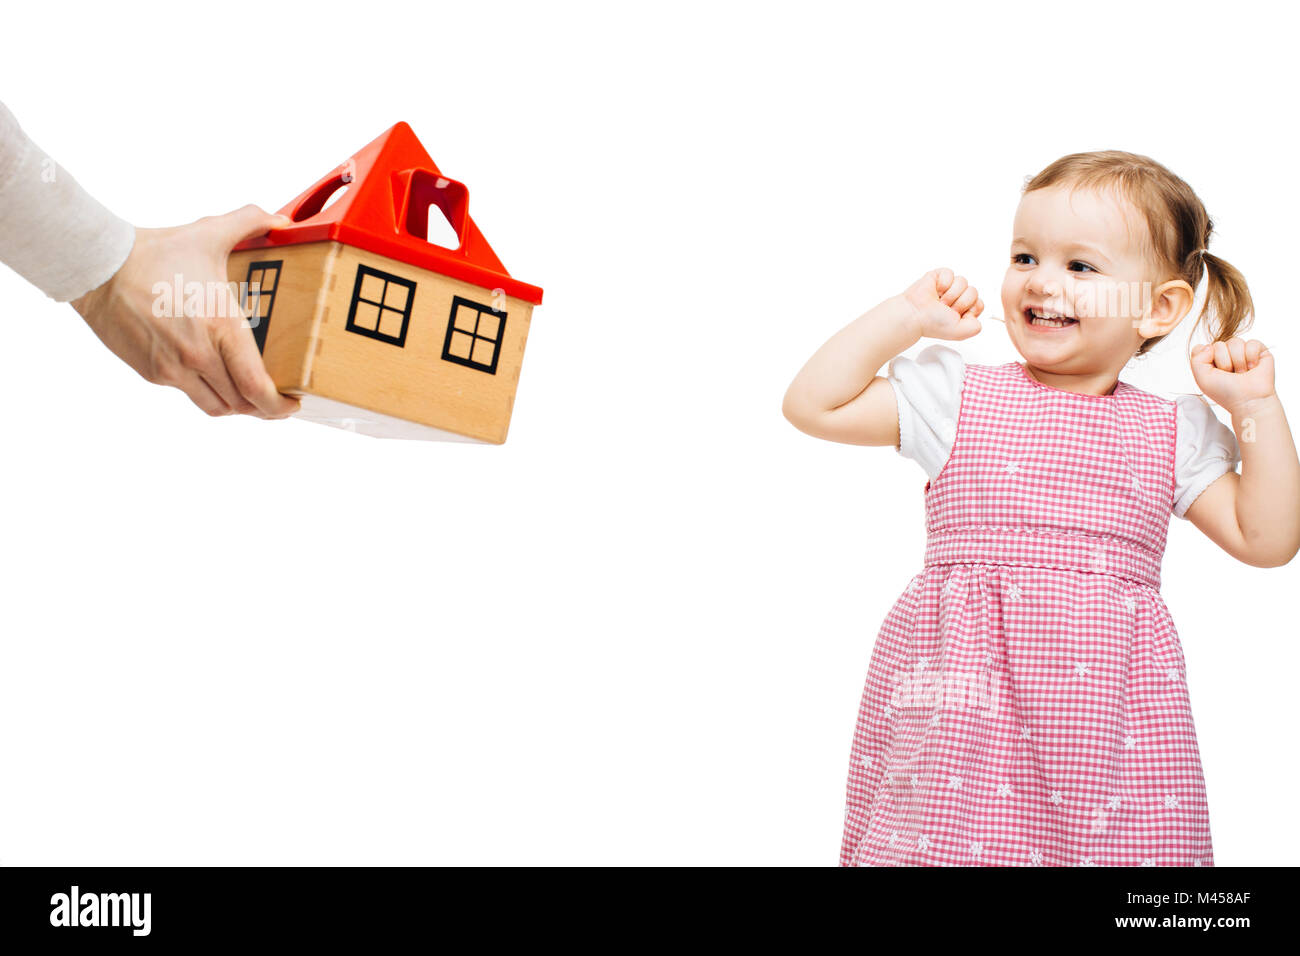 Happy toddler girl receiving a toy house Stock Photo